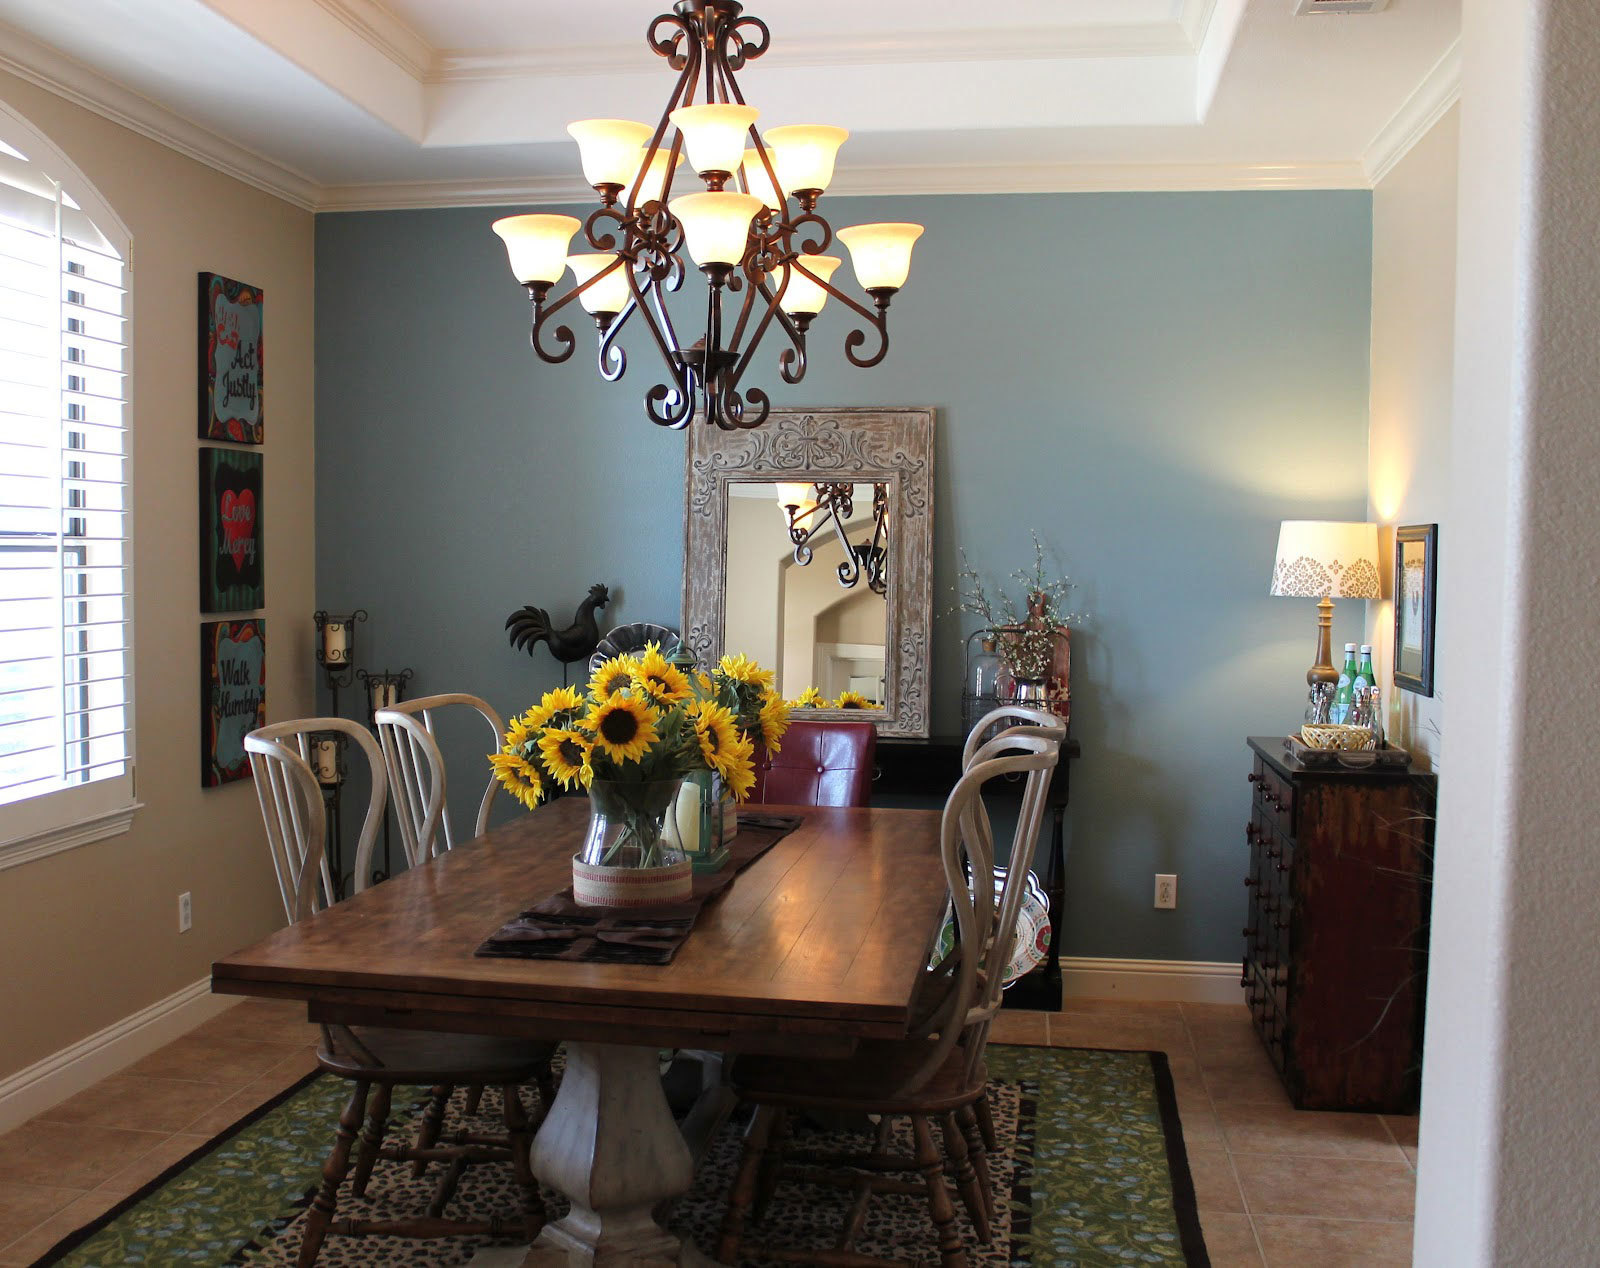 Pictures Of Dining Room Light Fixtures Over Tables